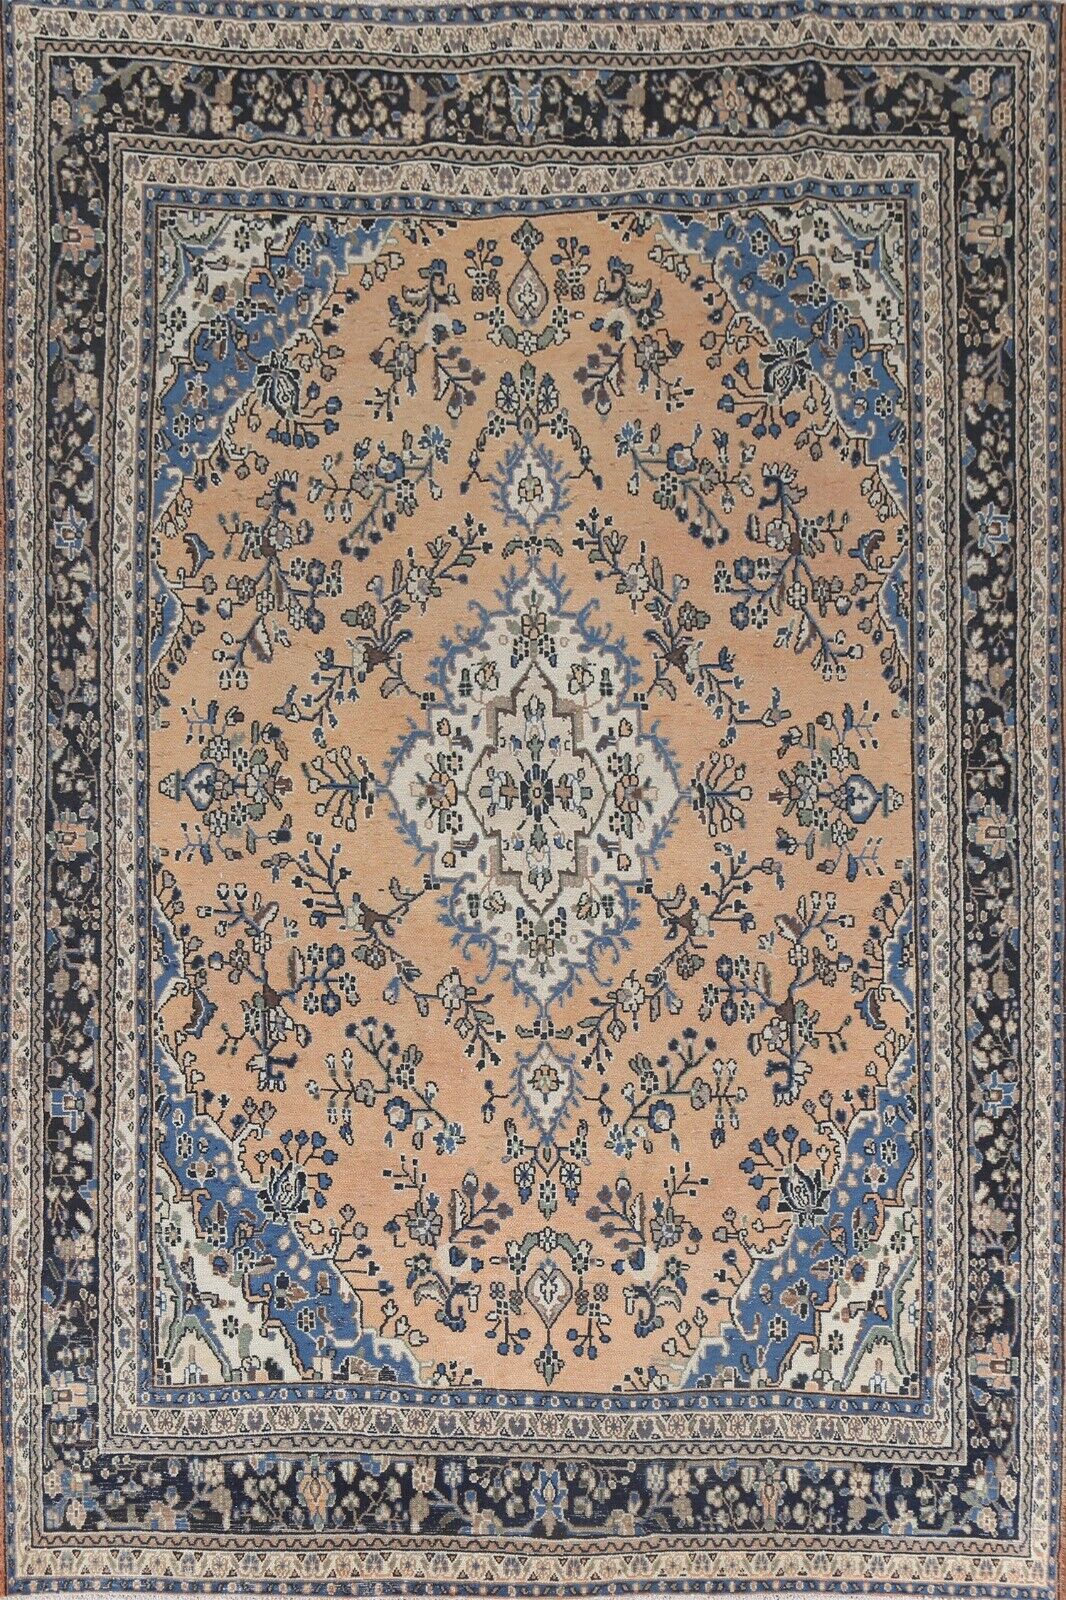 Vintage Muted Peach Hamedan Area Rug 9x12 ft Hand-knotted Low Pile Wool Carpet